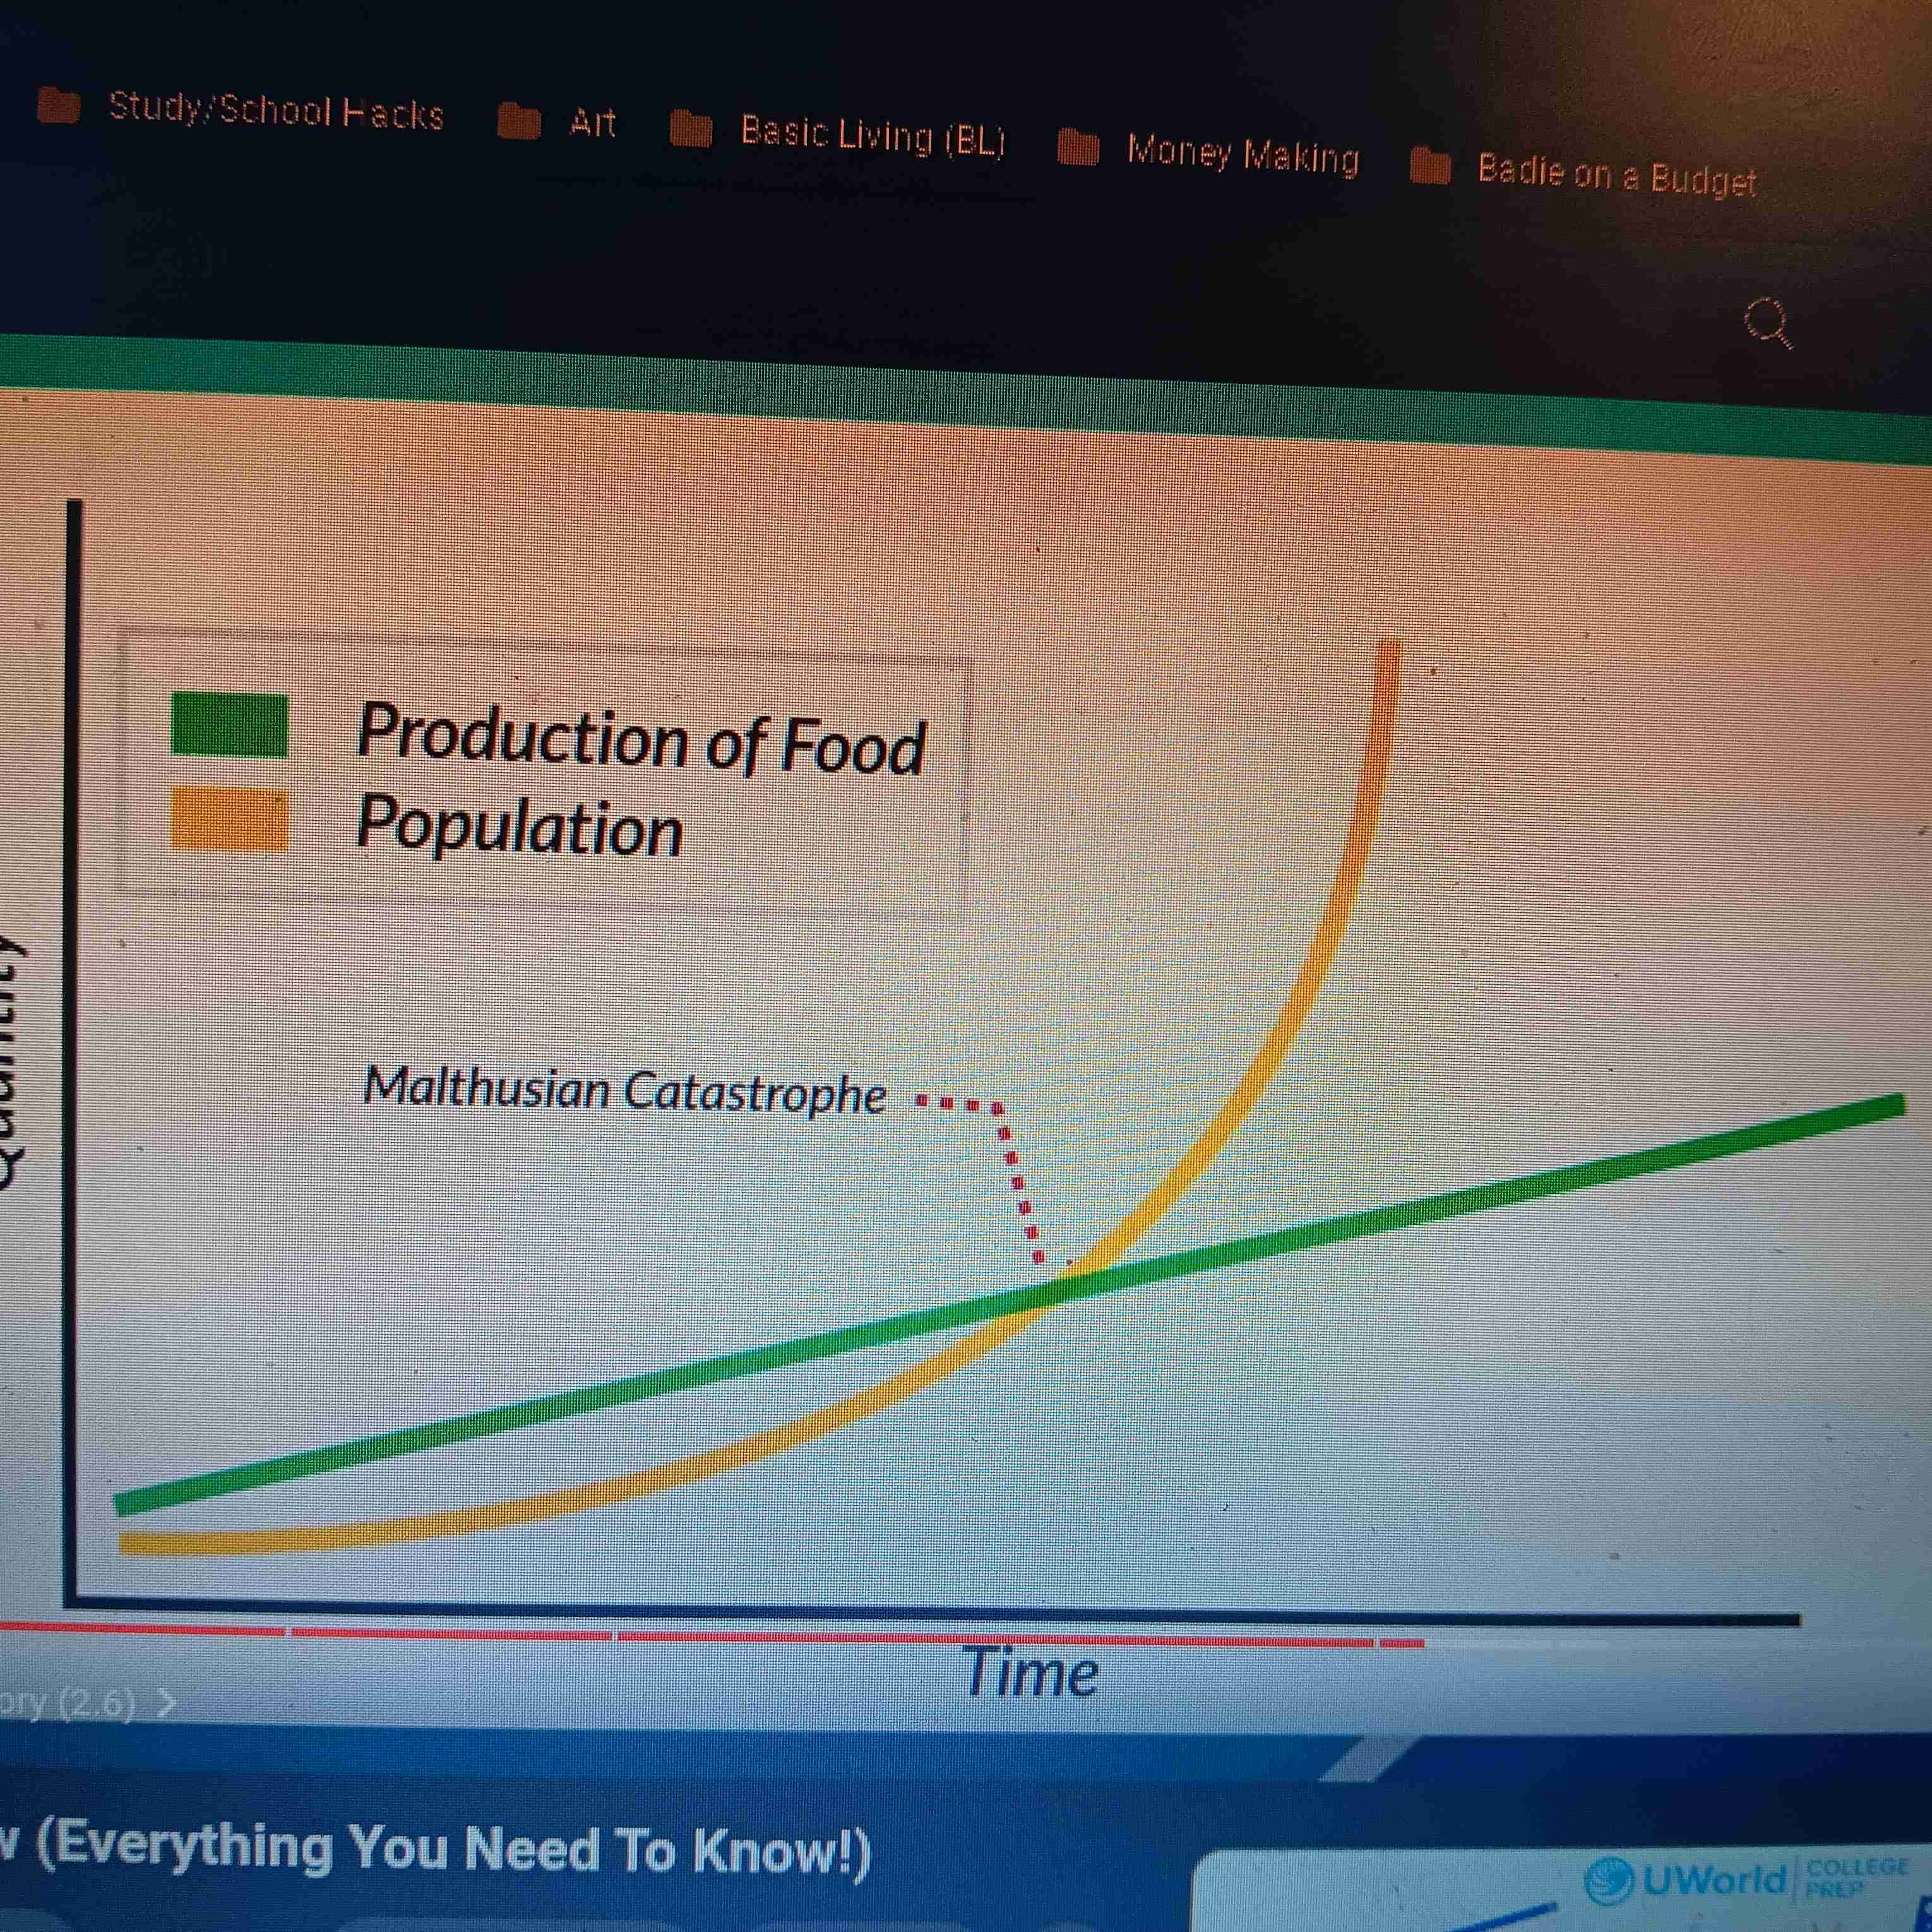 <p>Theory that population grows exponentially (increases one top of one another), it's ability to producefood would only increase arithmetically (increase in uniform amount). Leading to Famine, war, disease outbreaks</p>